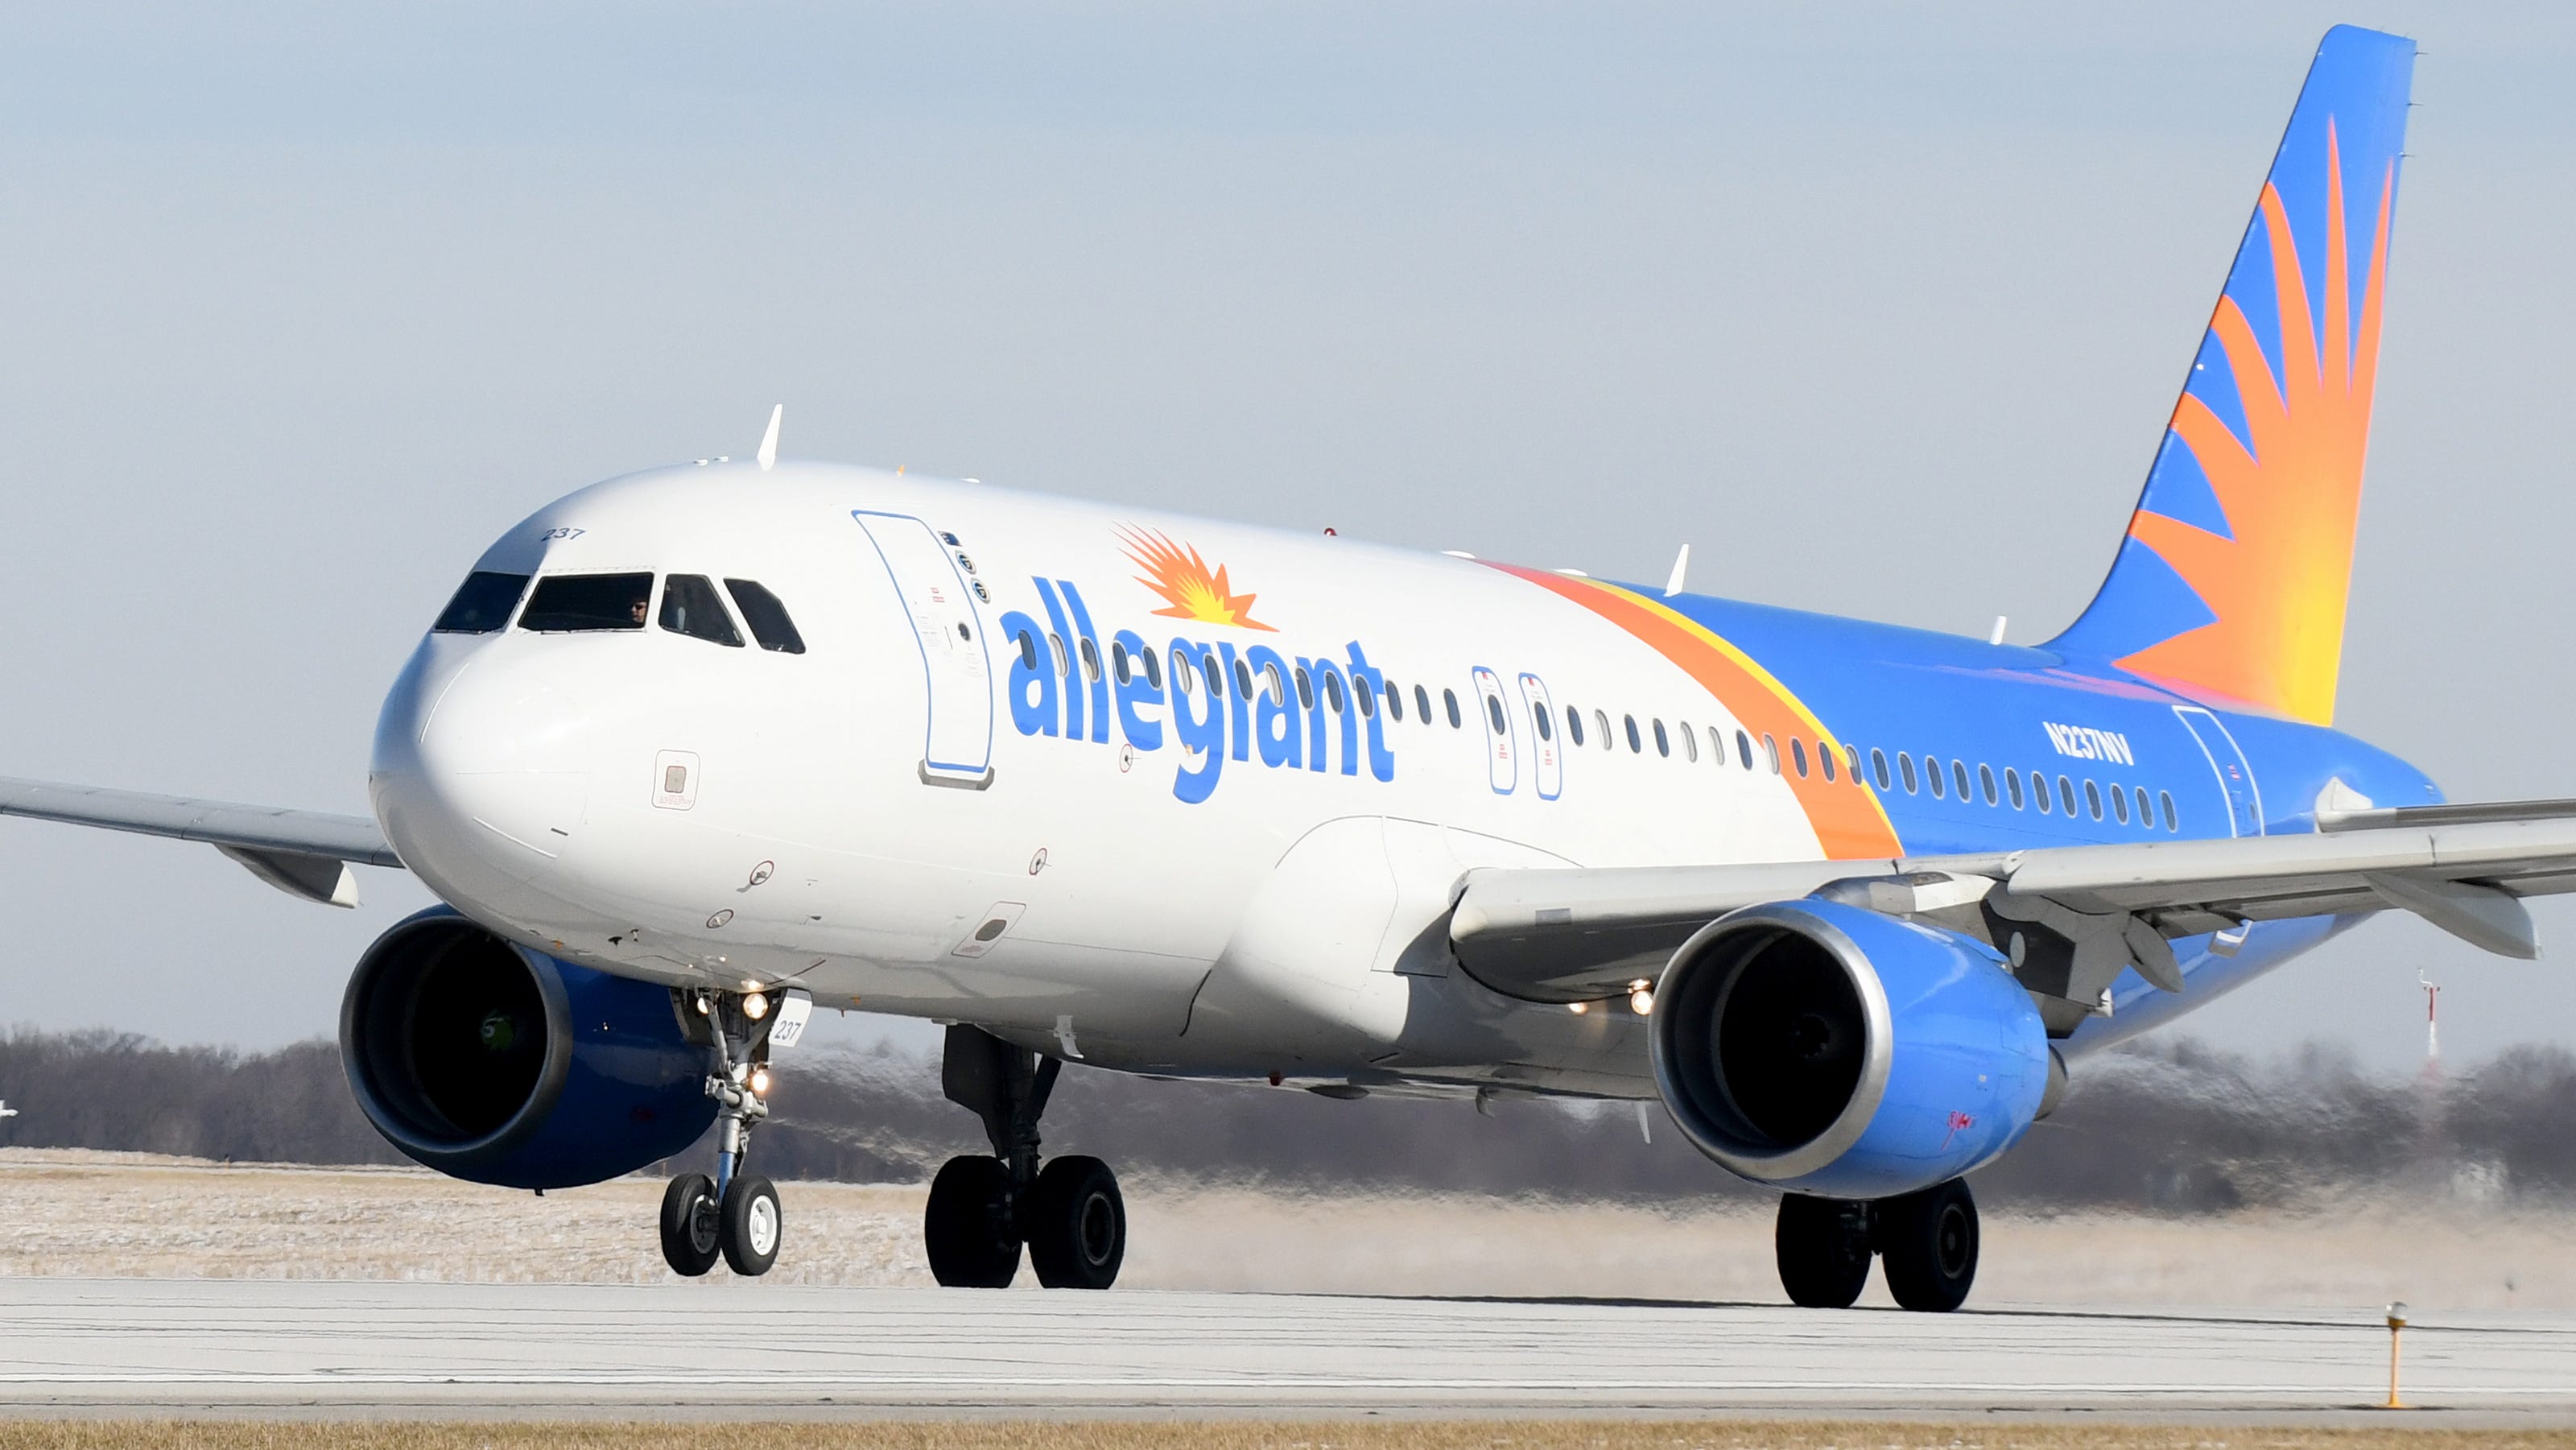 Ian: Allegiant Air resumes service at Charlotte County airport